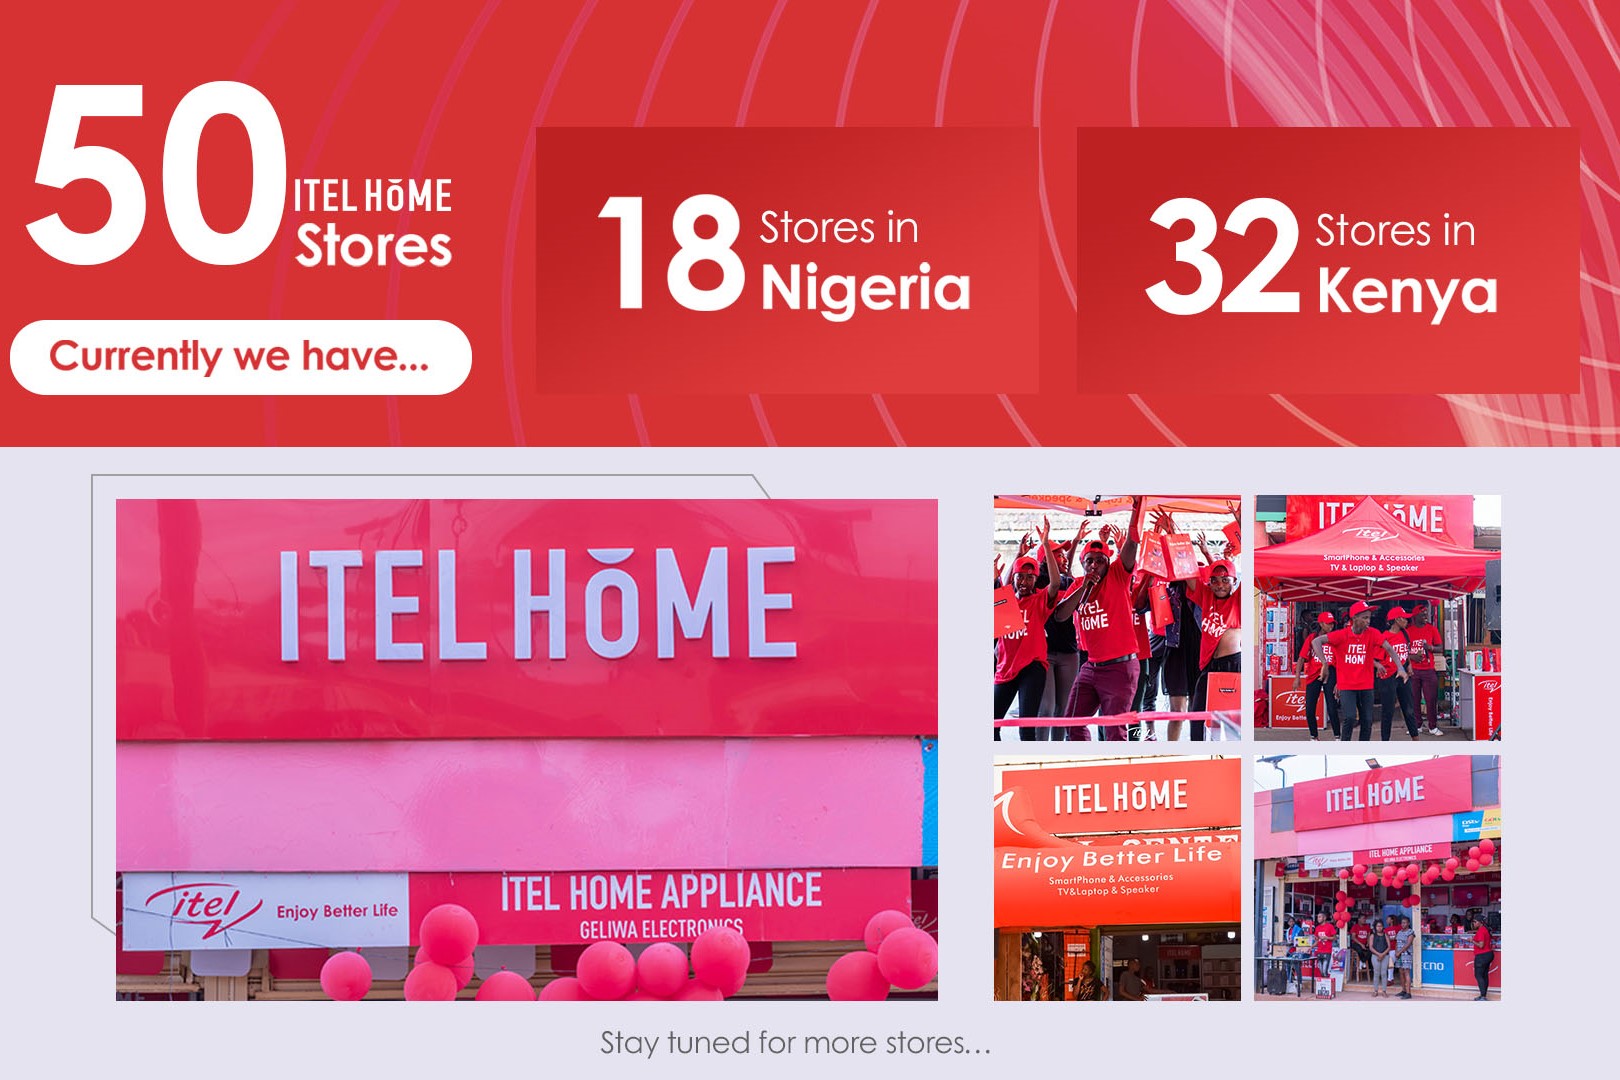 itel has opened 50 itel Home locally in Africa